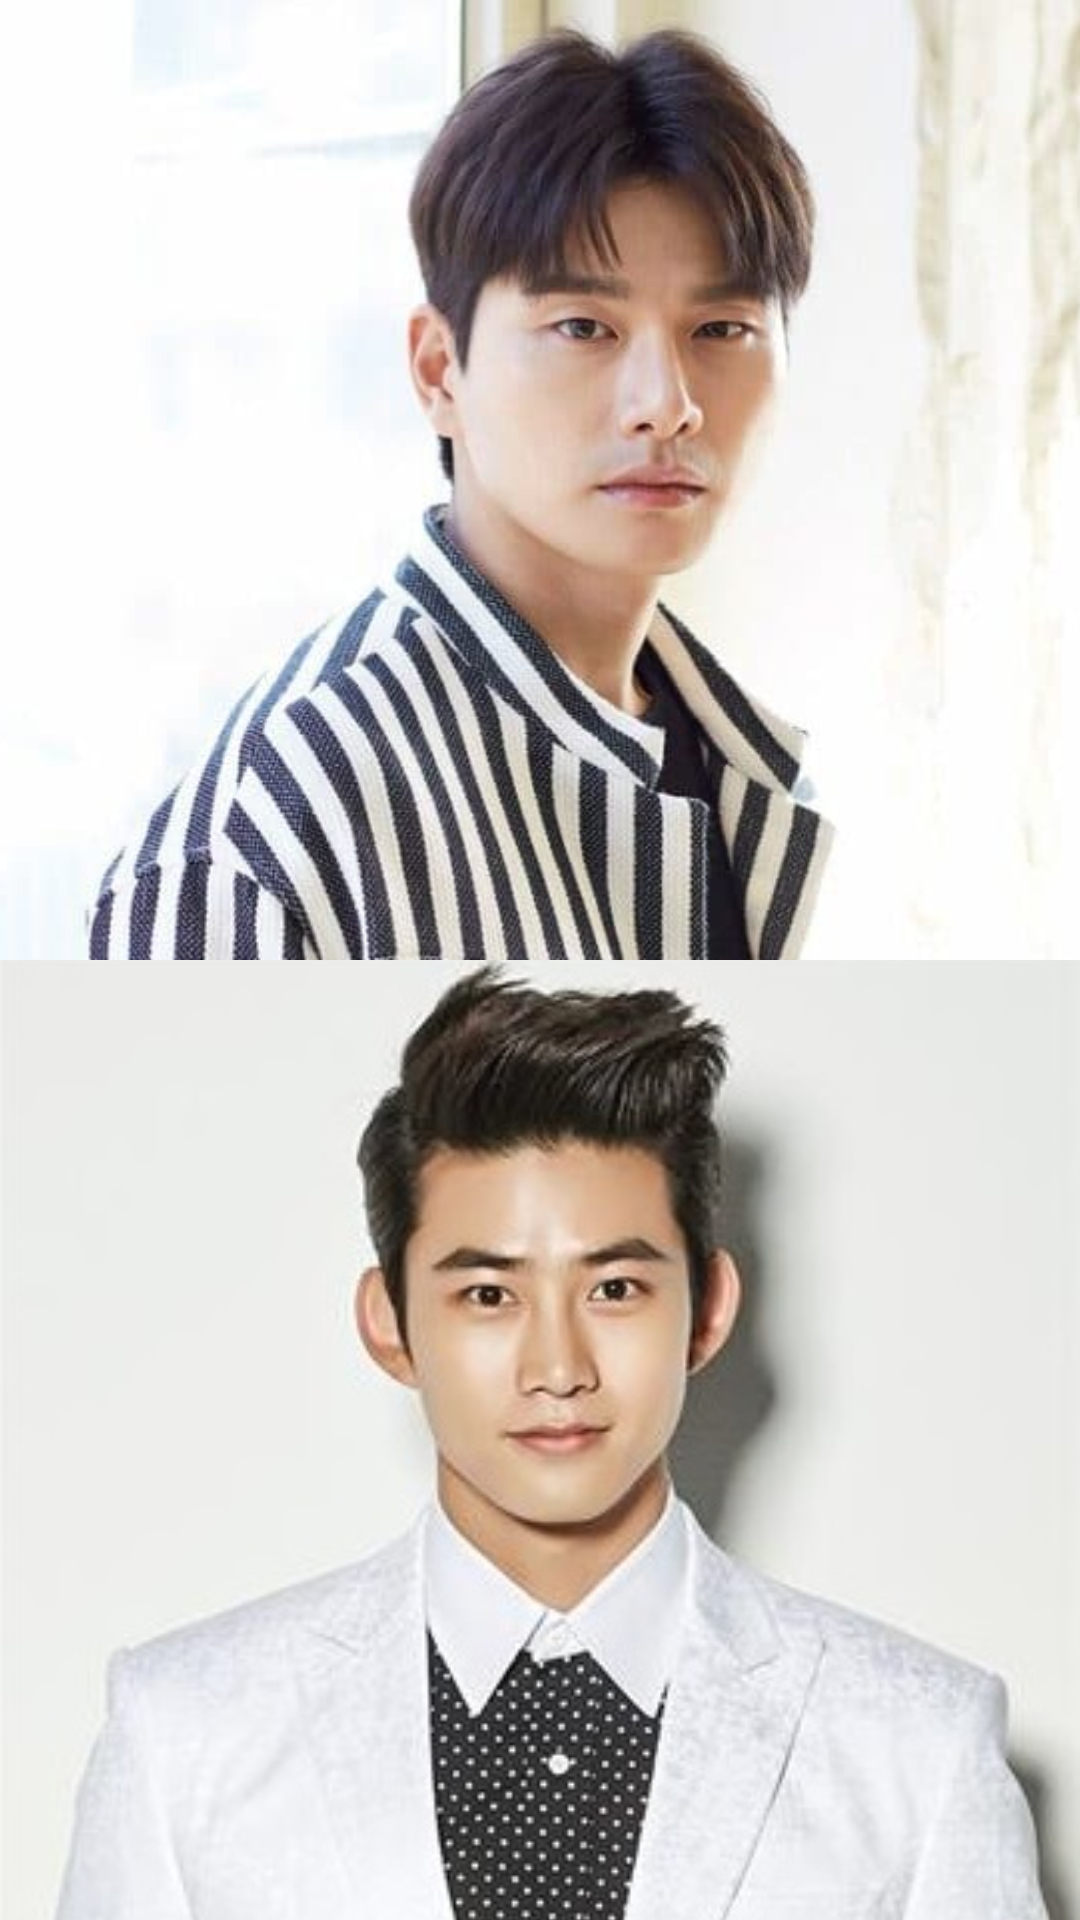 Lee Yi Kyung to Ok Taec-yeon: K-Drama actors who can play both positive &amp; grey roles